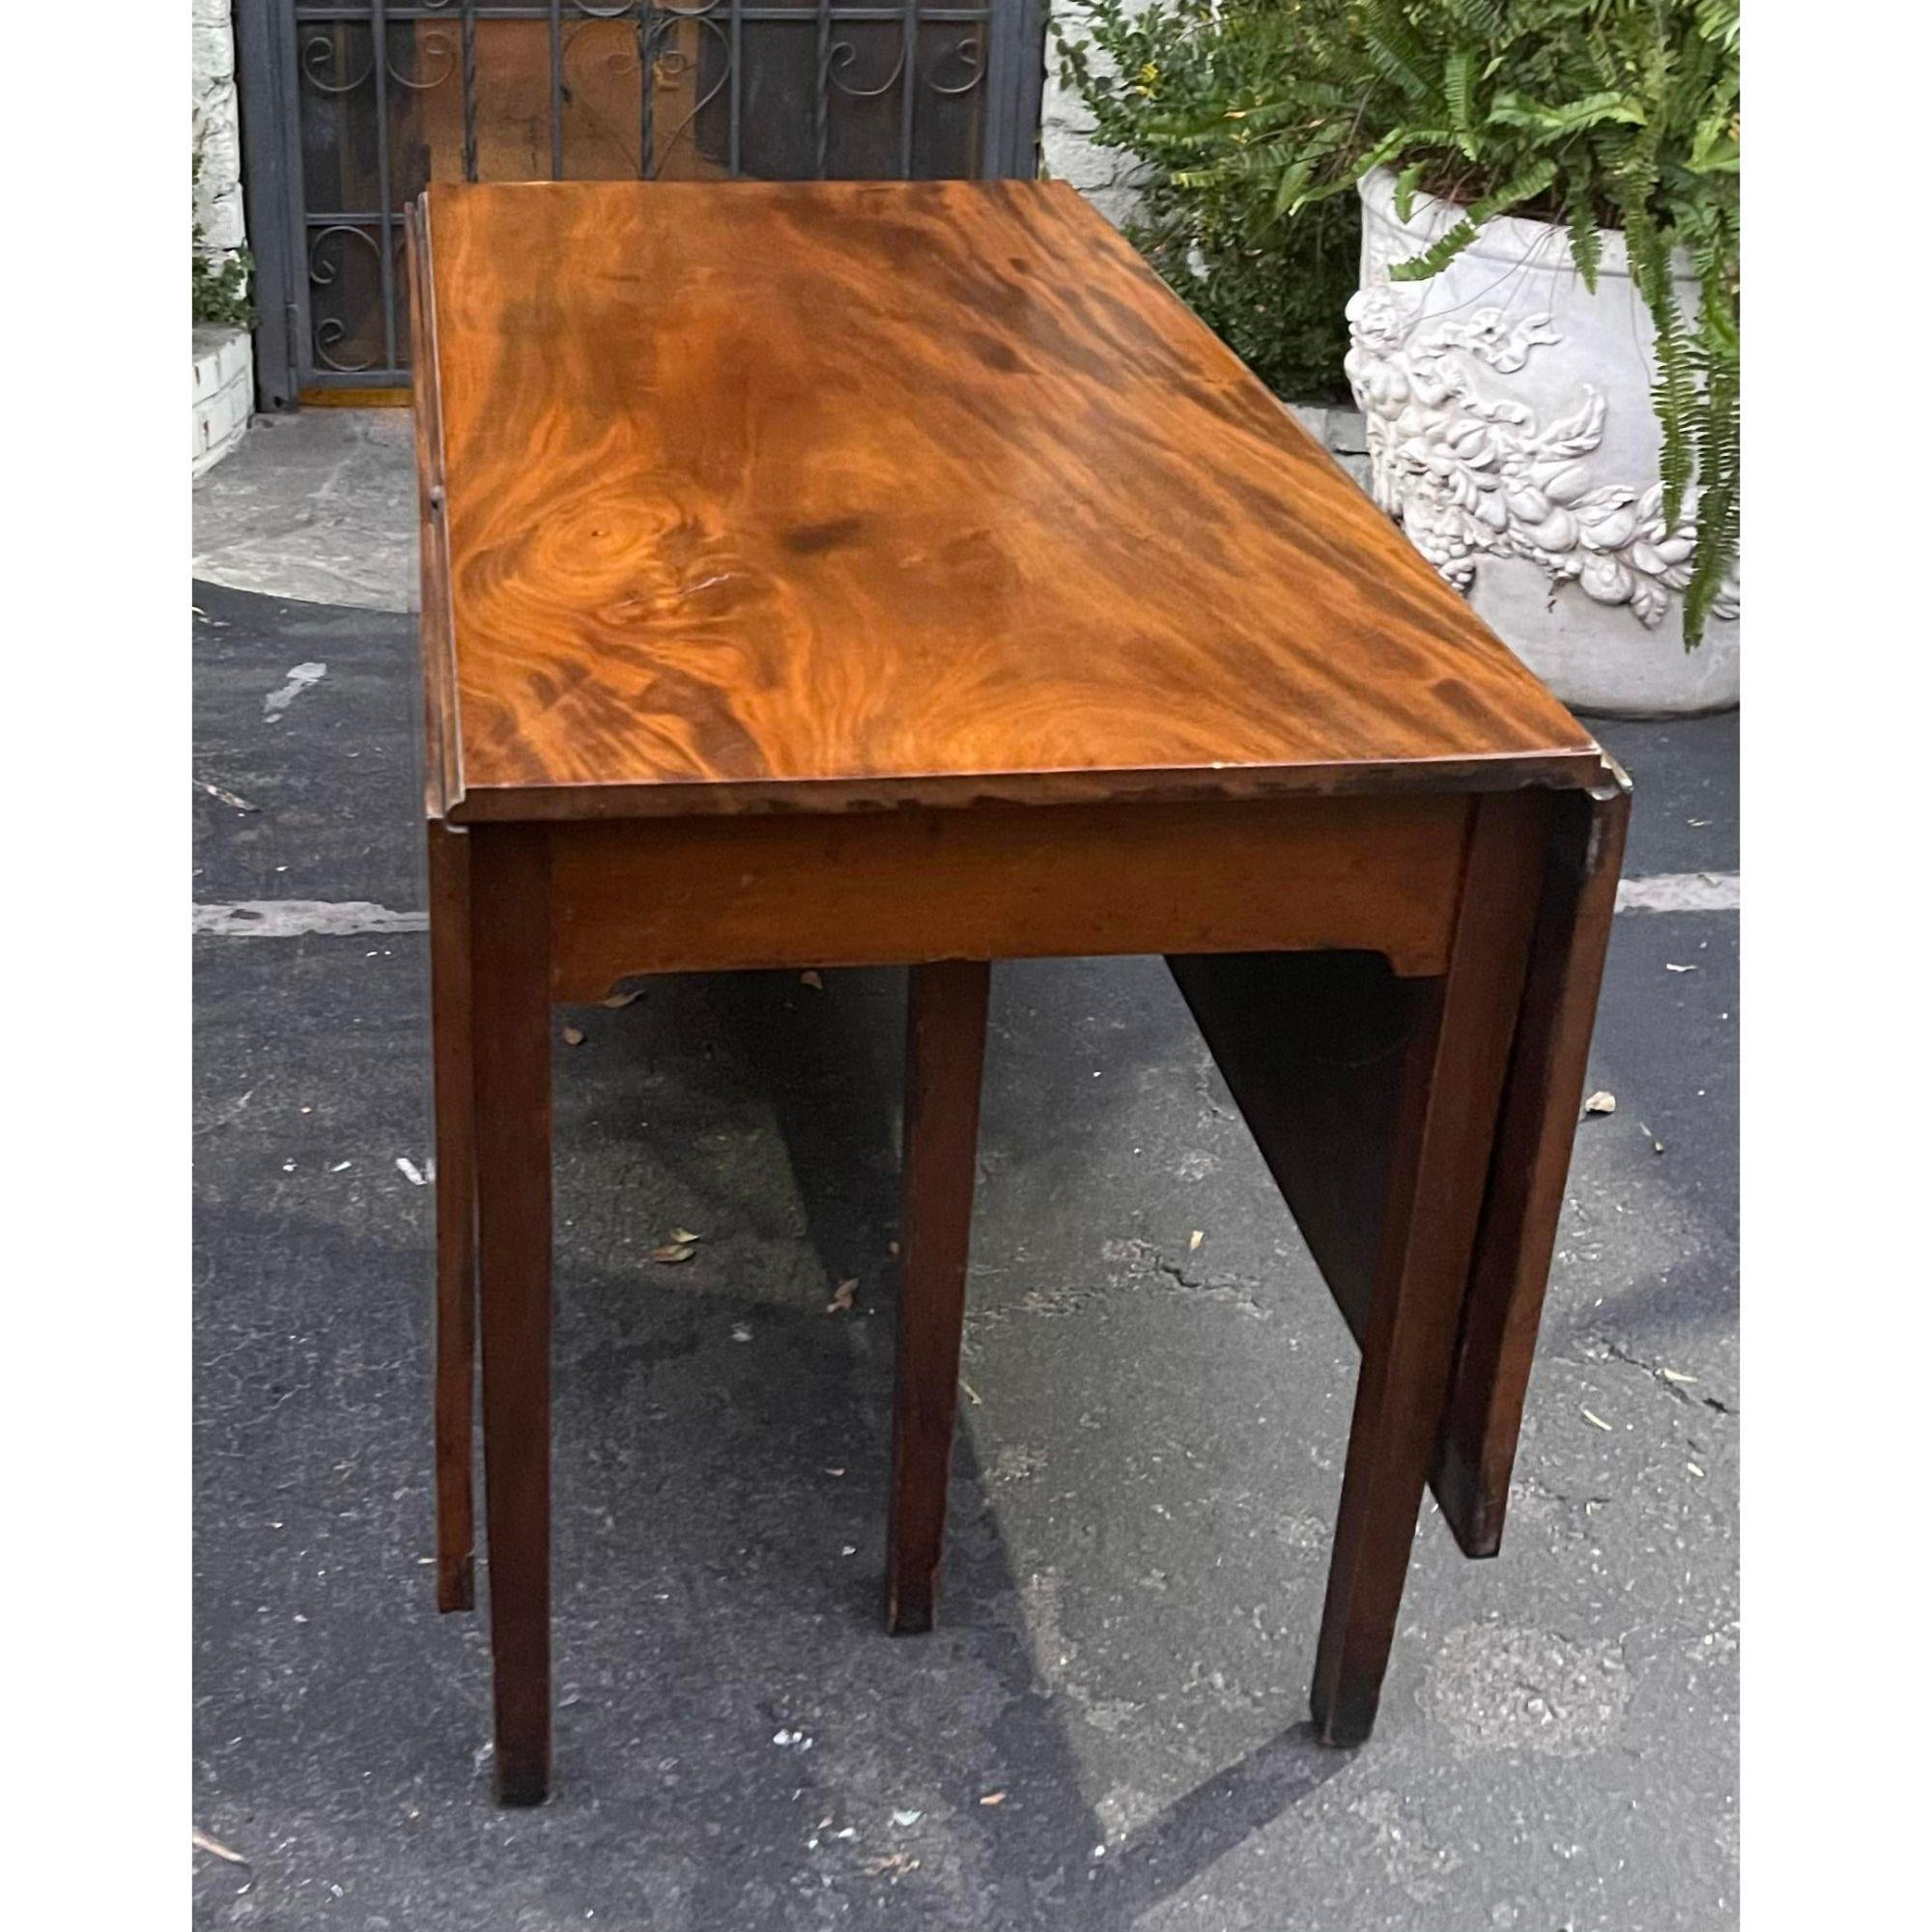 Antique 18th C English Honduran mahogany drop lead dining table.
Opens to 64” long.

Additional information:
Materials: mahogany.
Please note that this item contains materials that are legally subject to a special export process that may extend